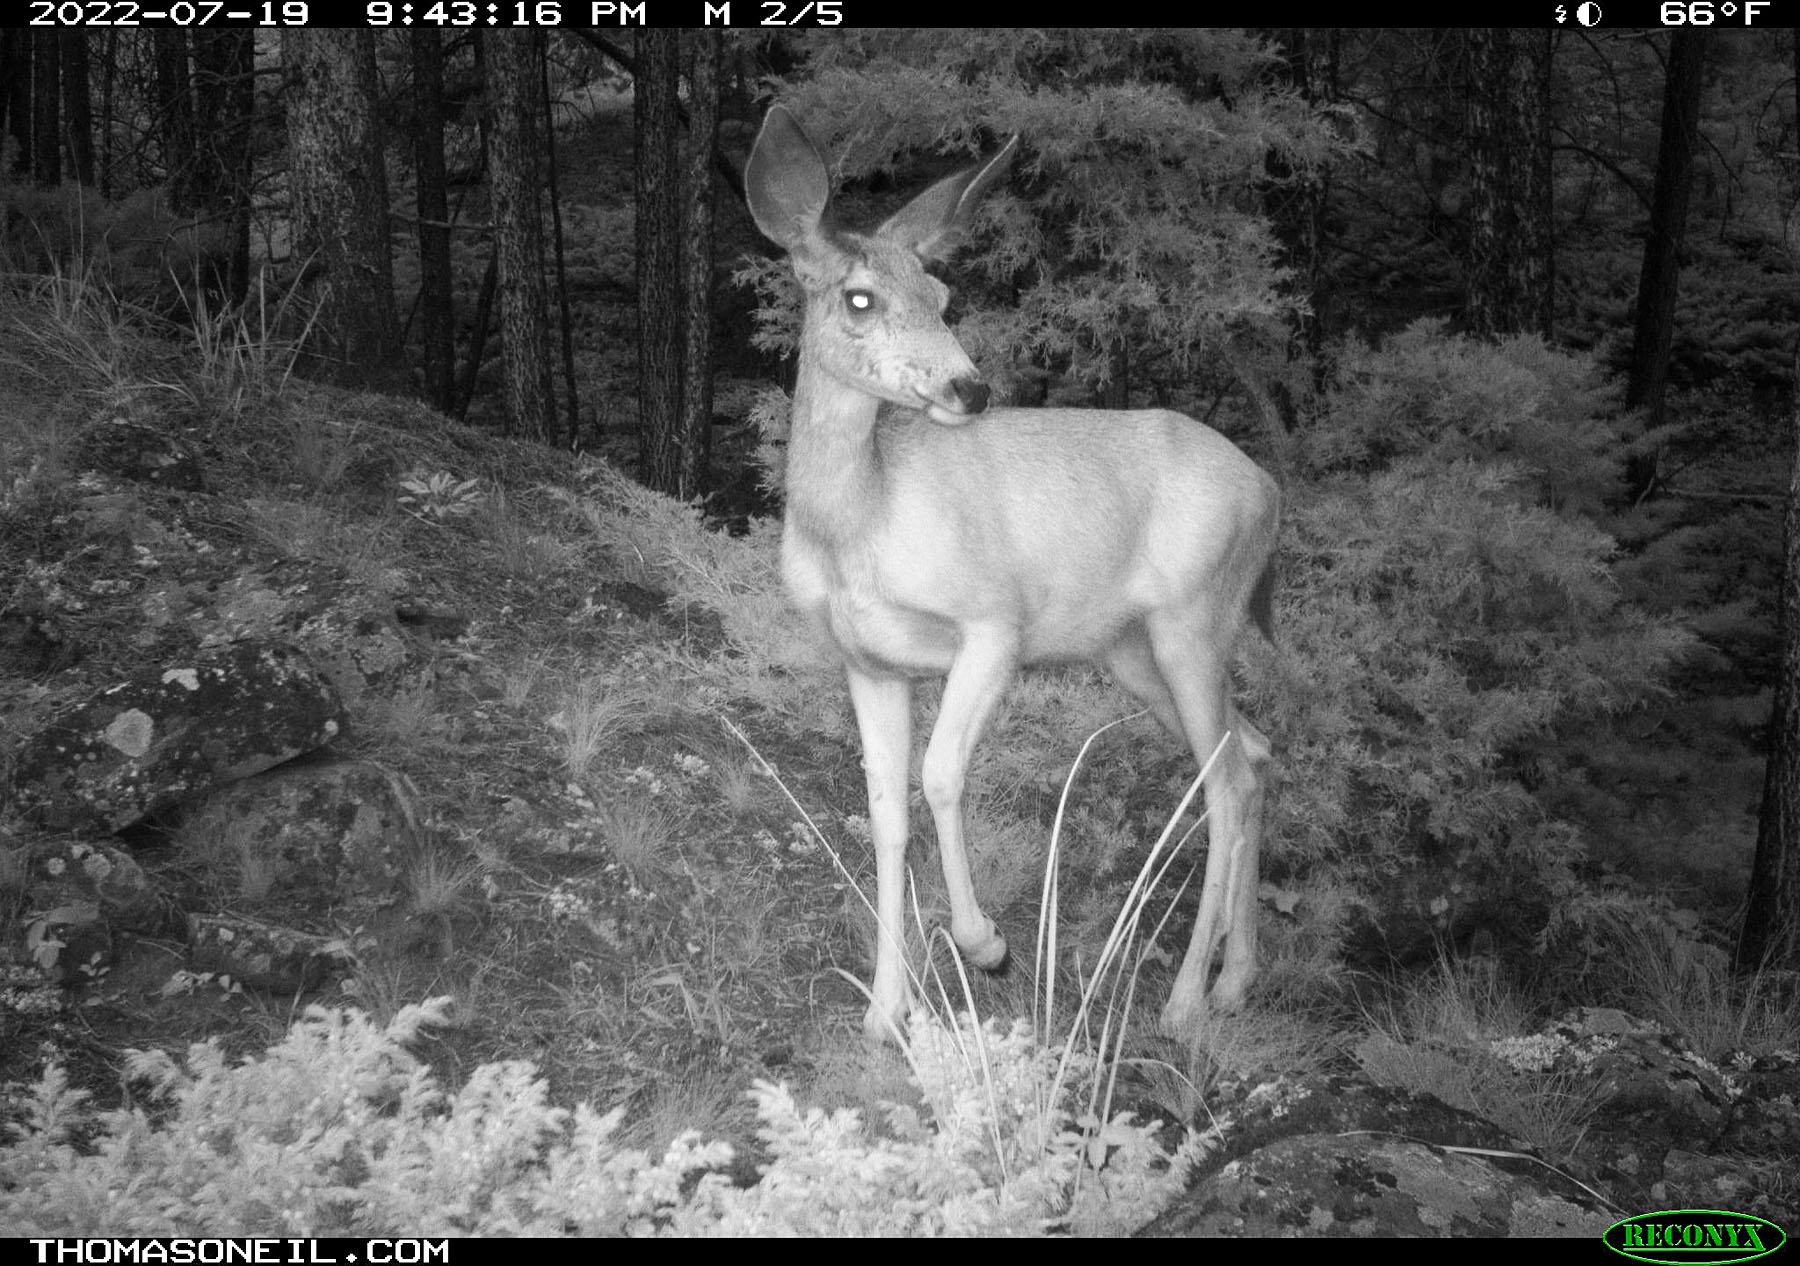 Deer on trailcam near Red Lodge, MT.  Click for next photo.